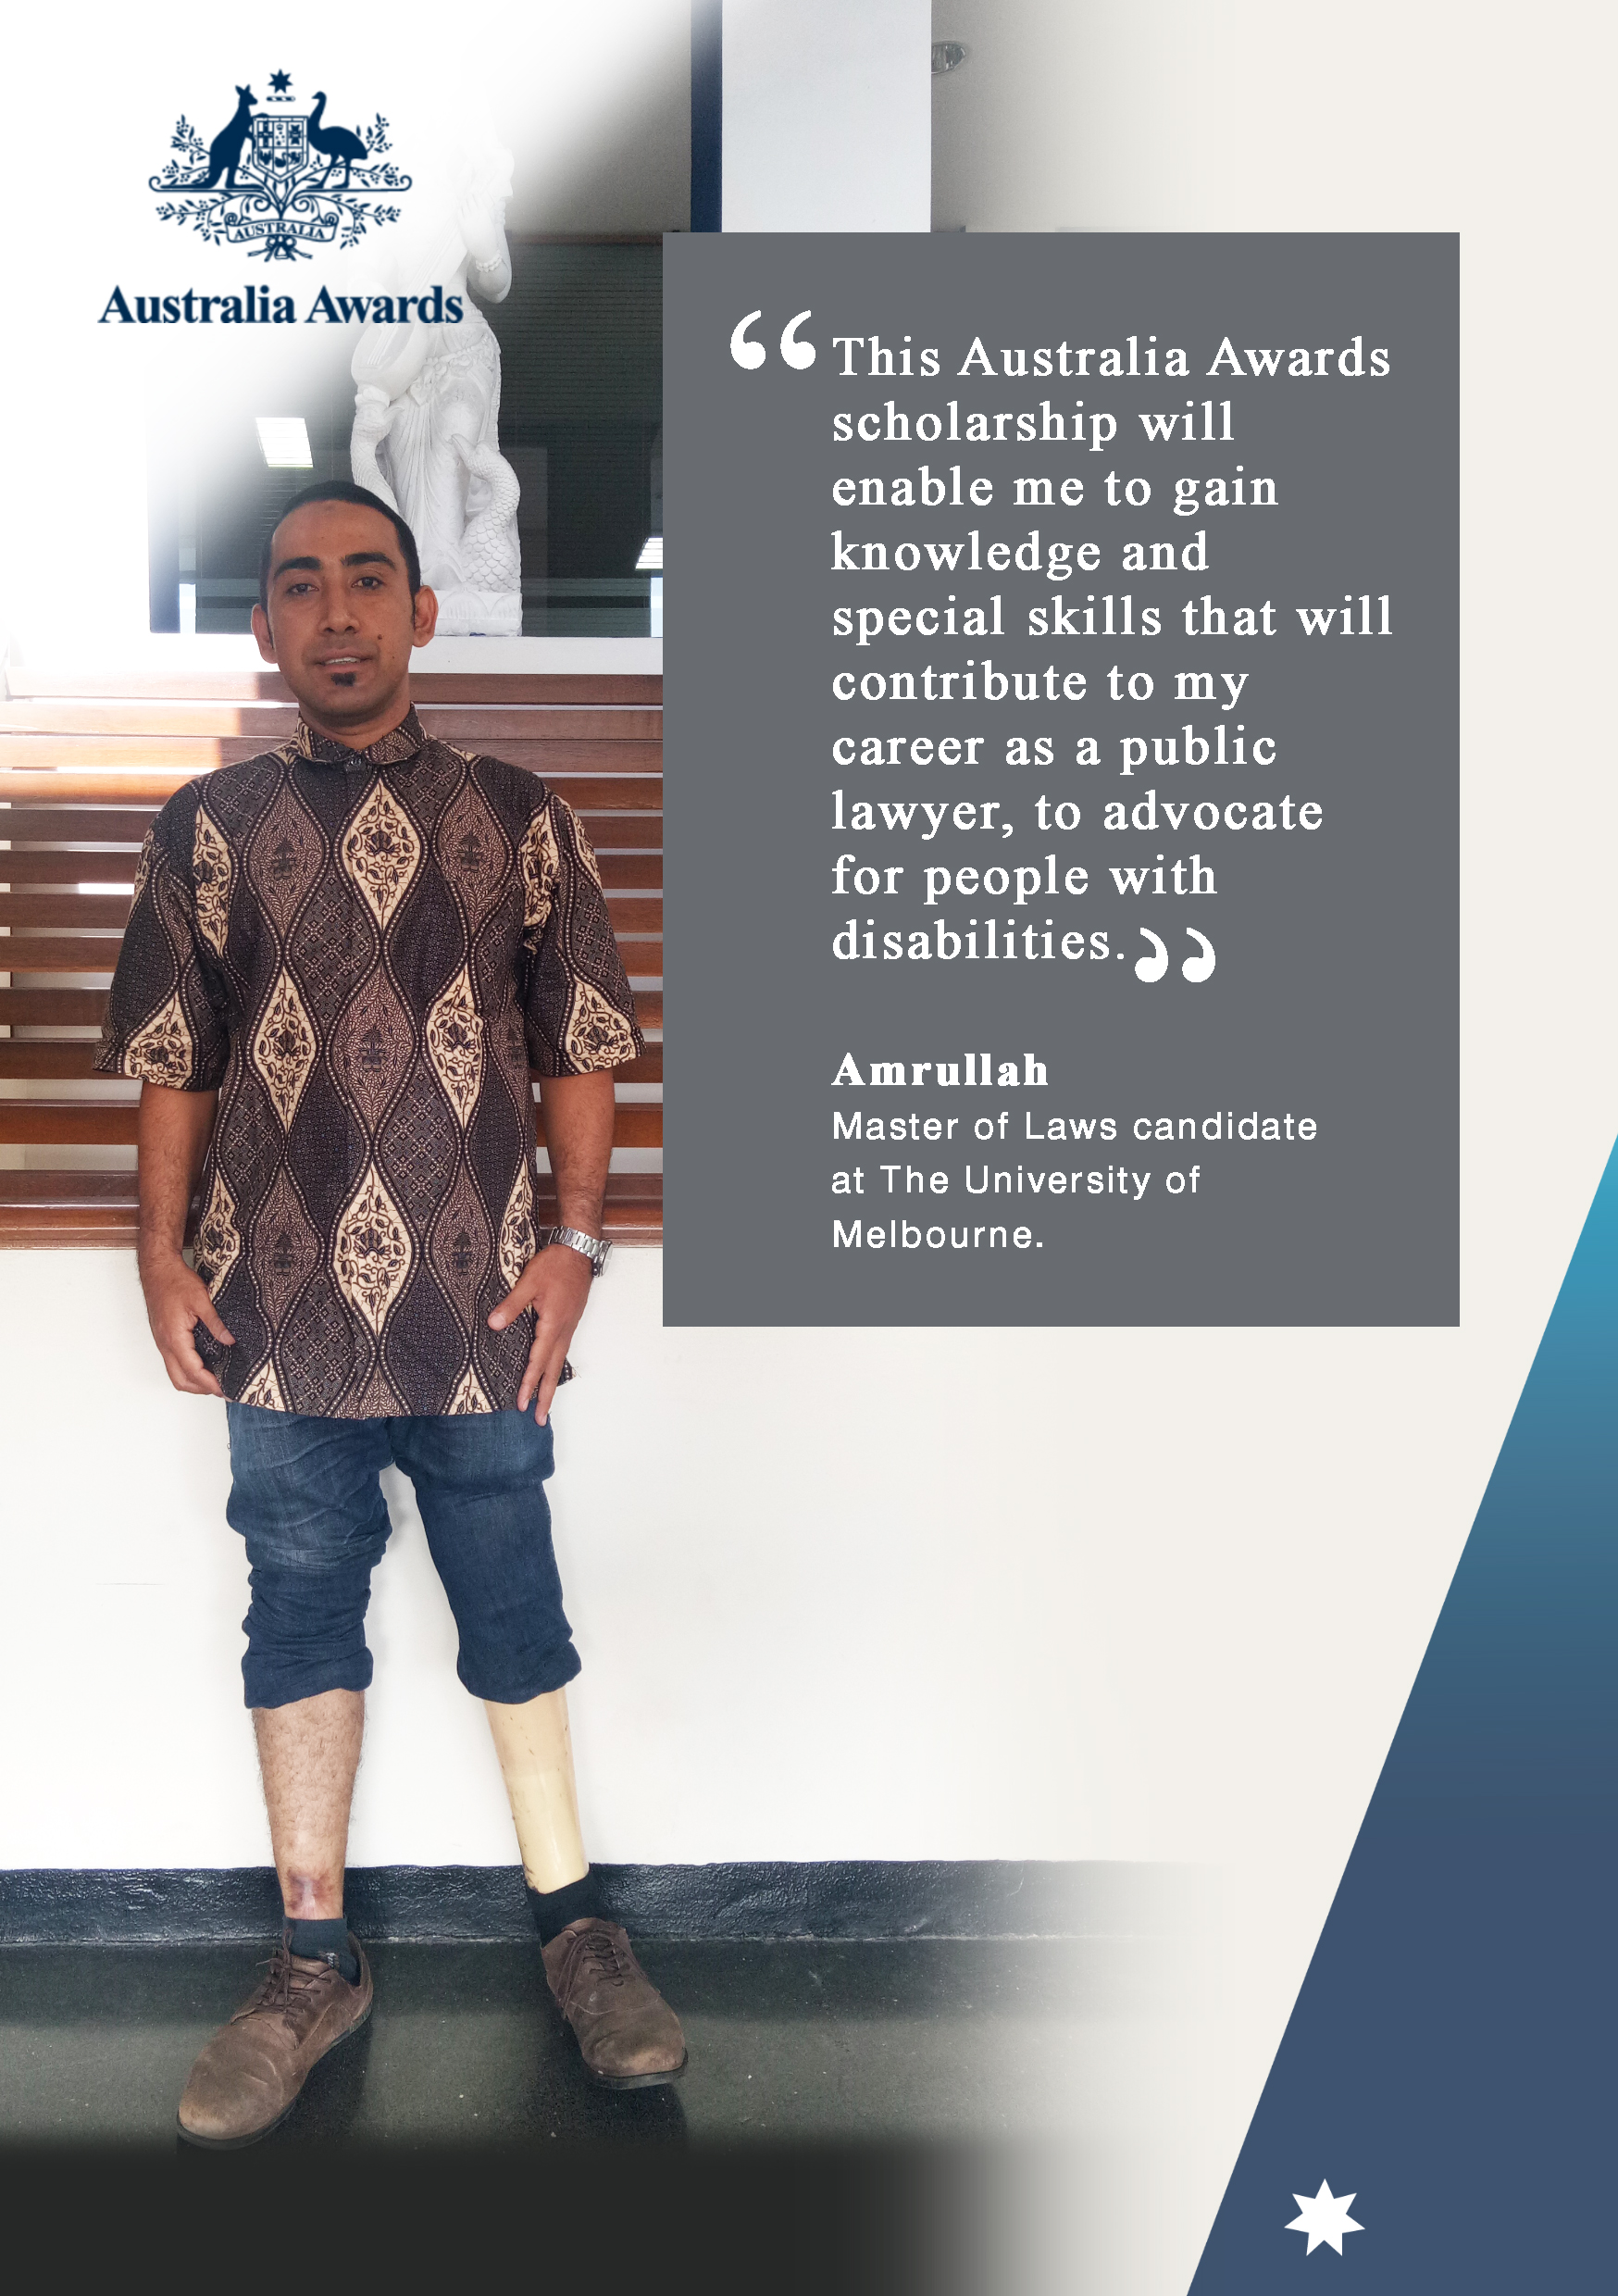 Quote from Amrullah, Master of Laws candidate at The University of Melbourne.